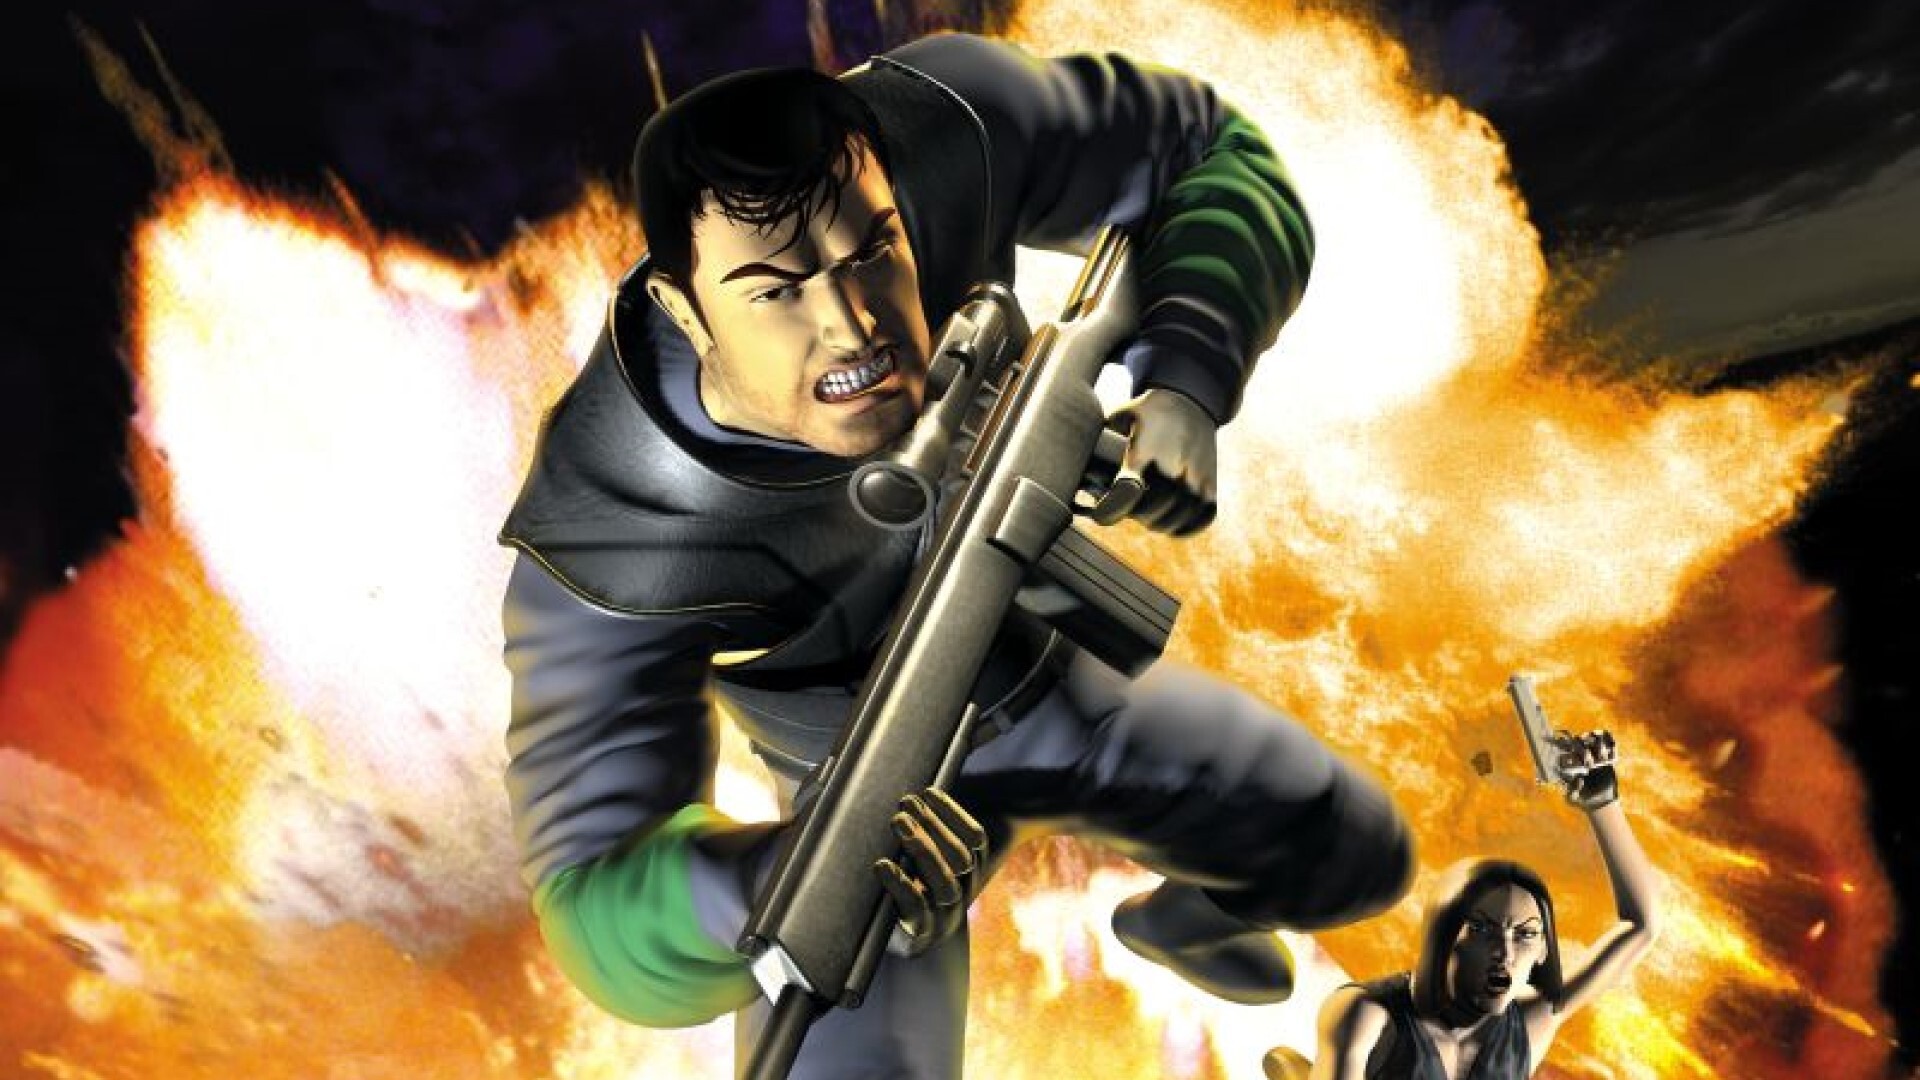 Syphon Filter 3 And Ghost Trick Have Been Rated in Korea - GameSpot